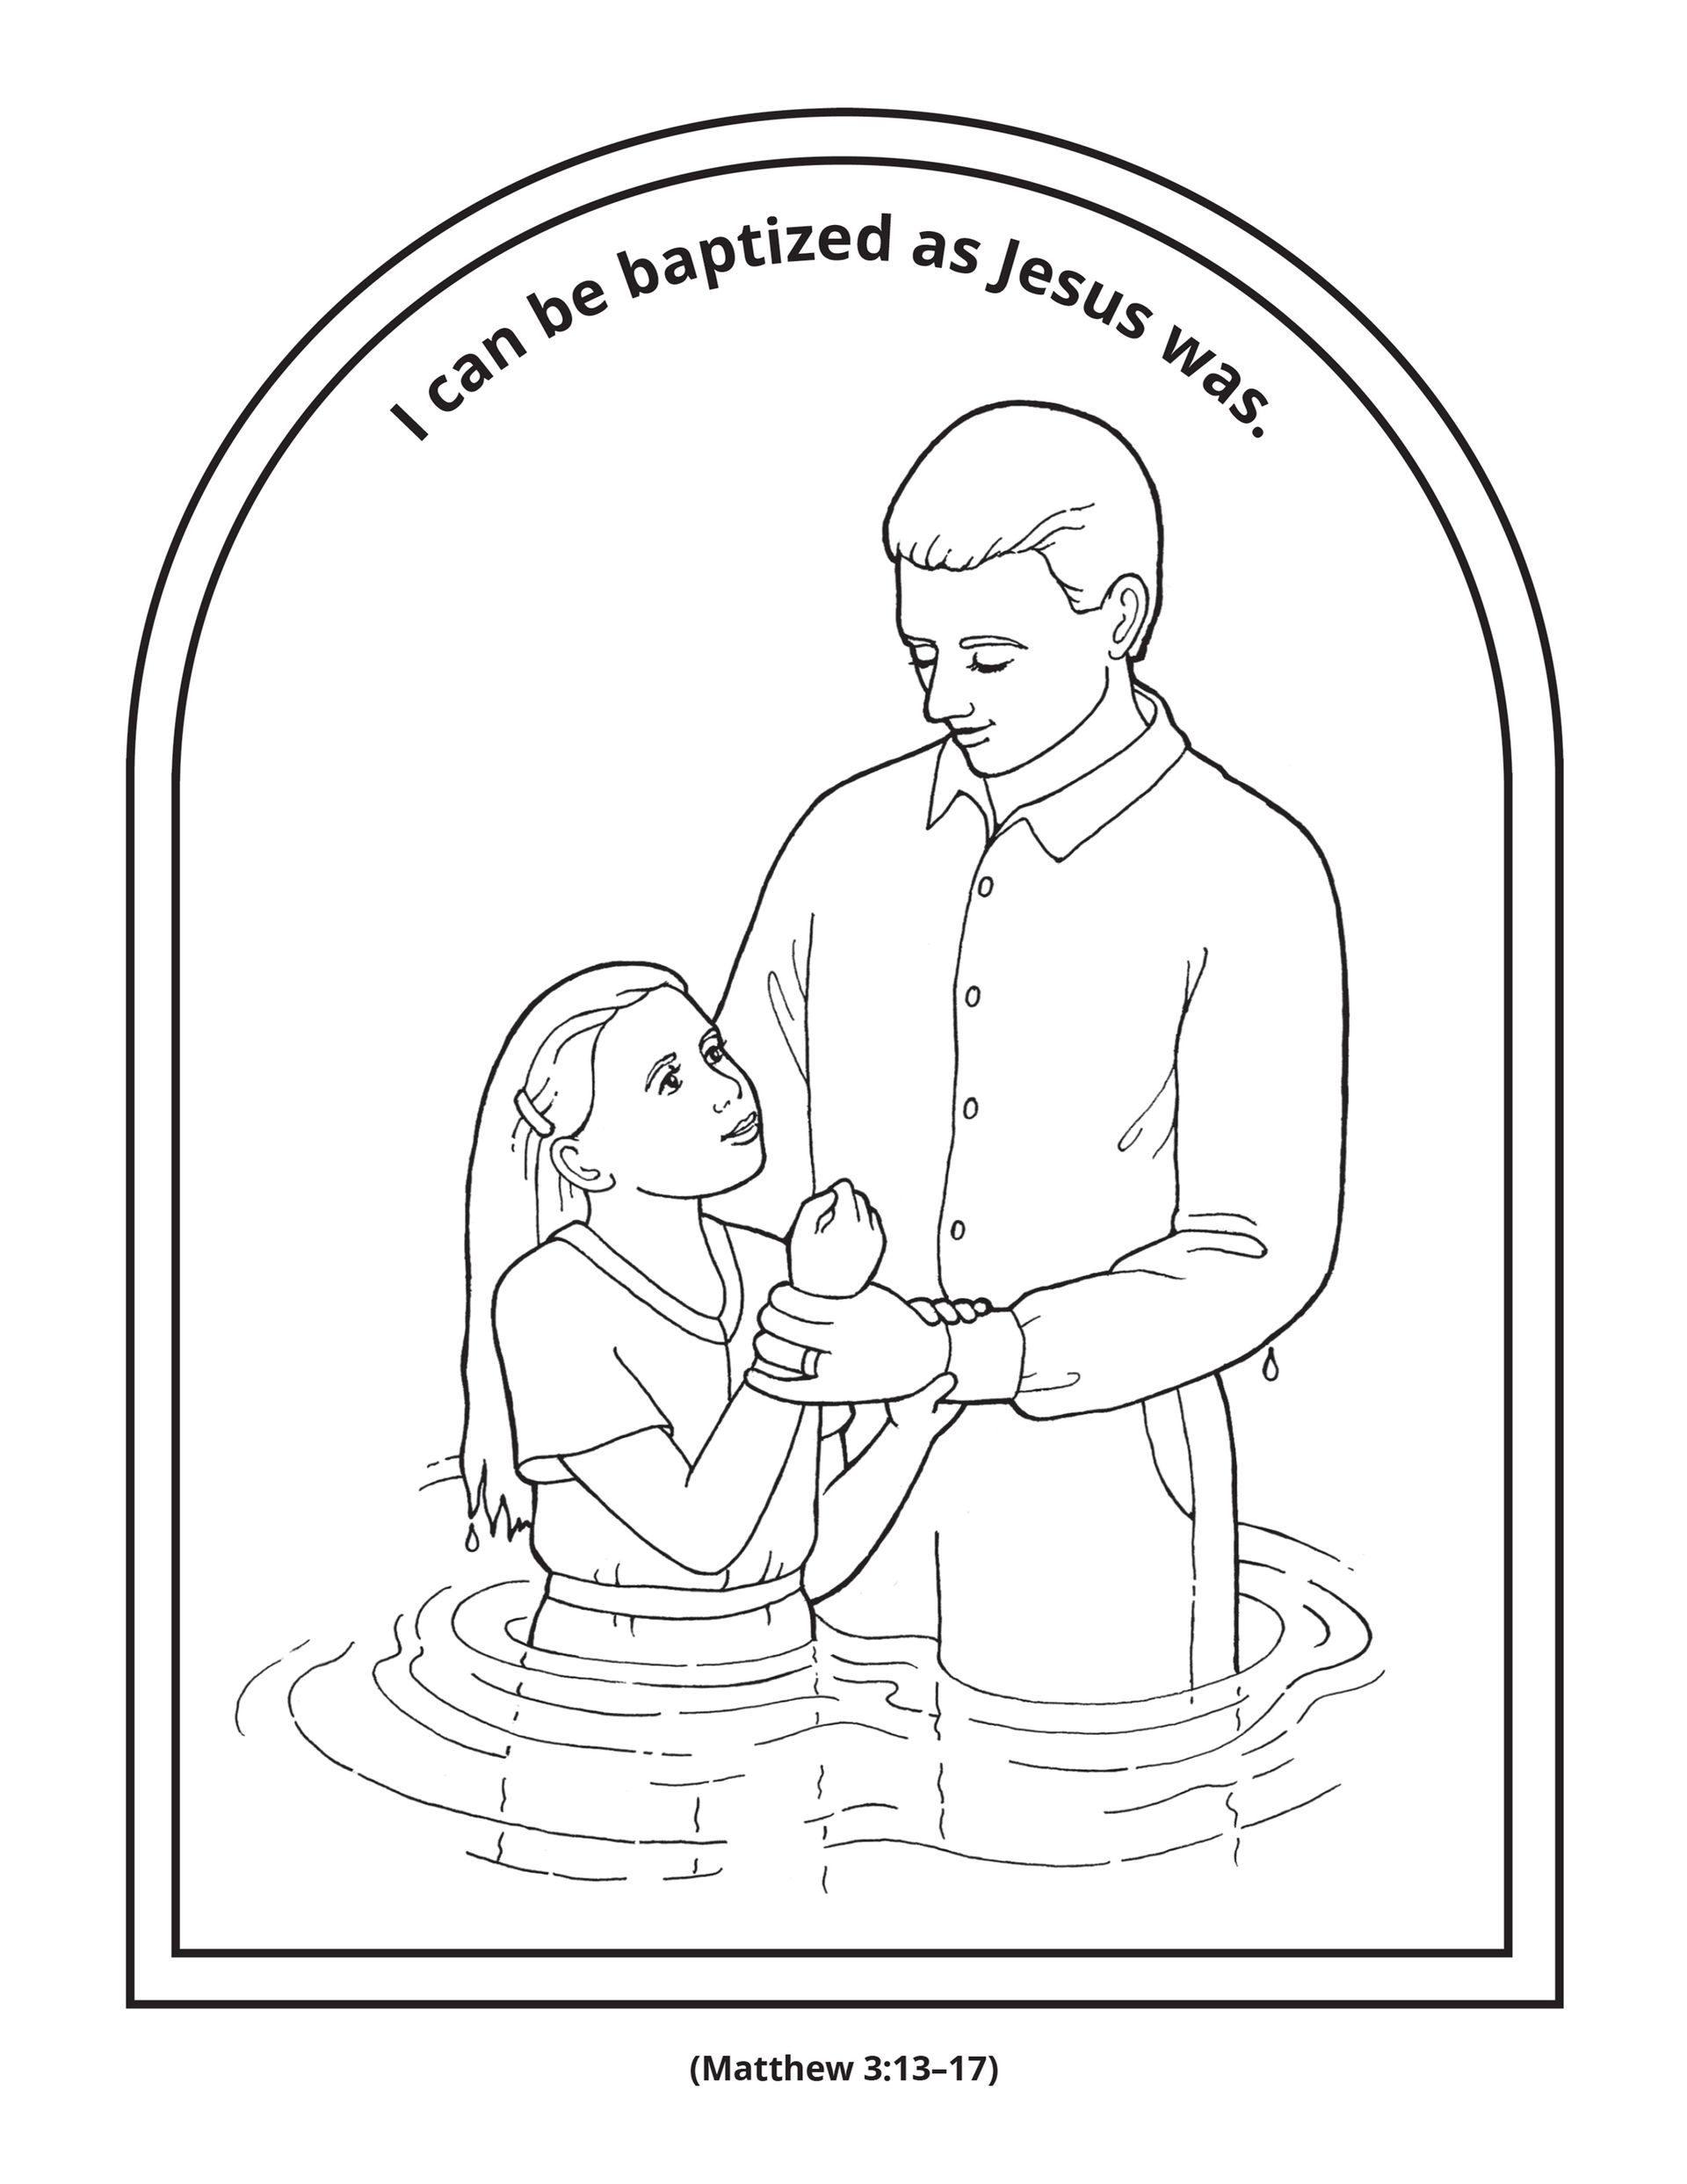 the baptism of jesus clipart